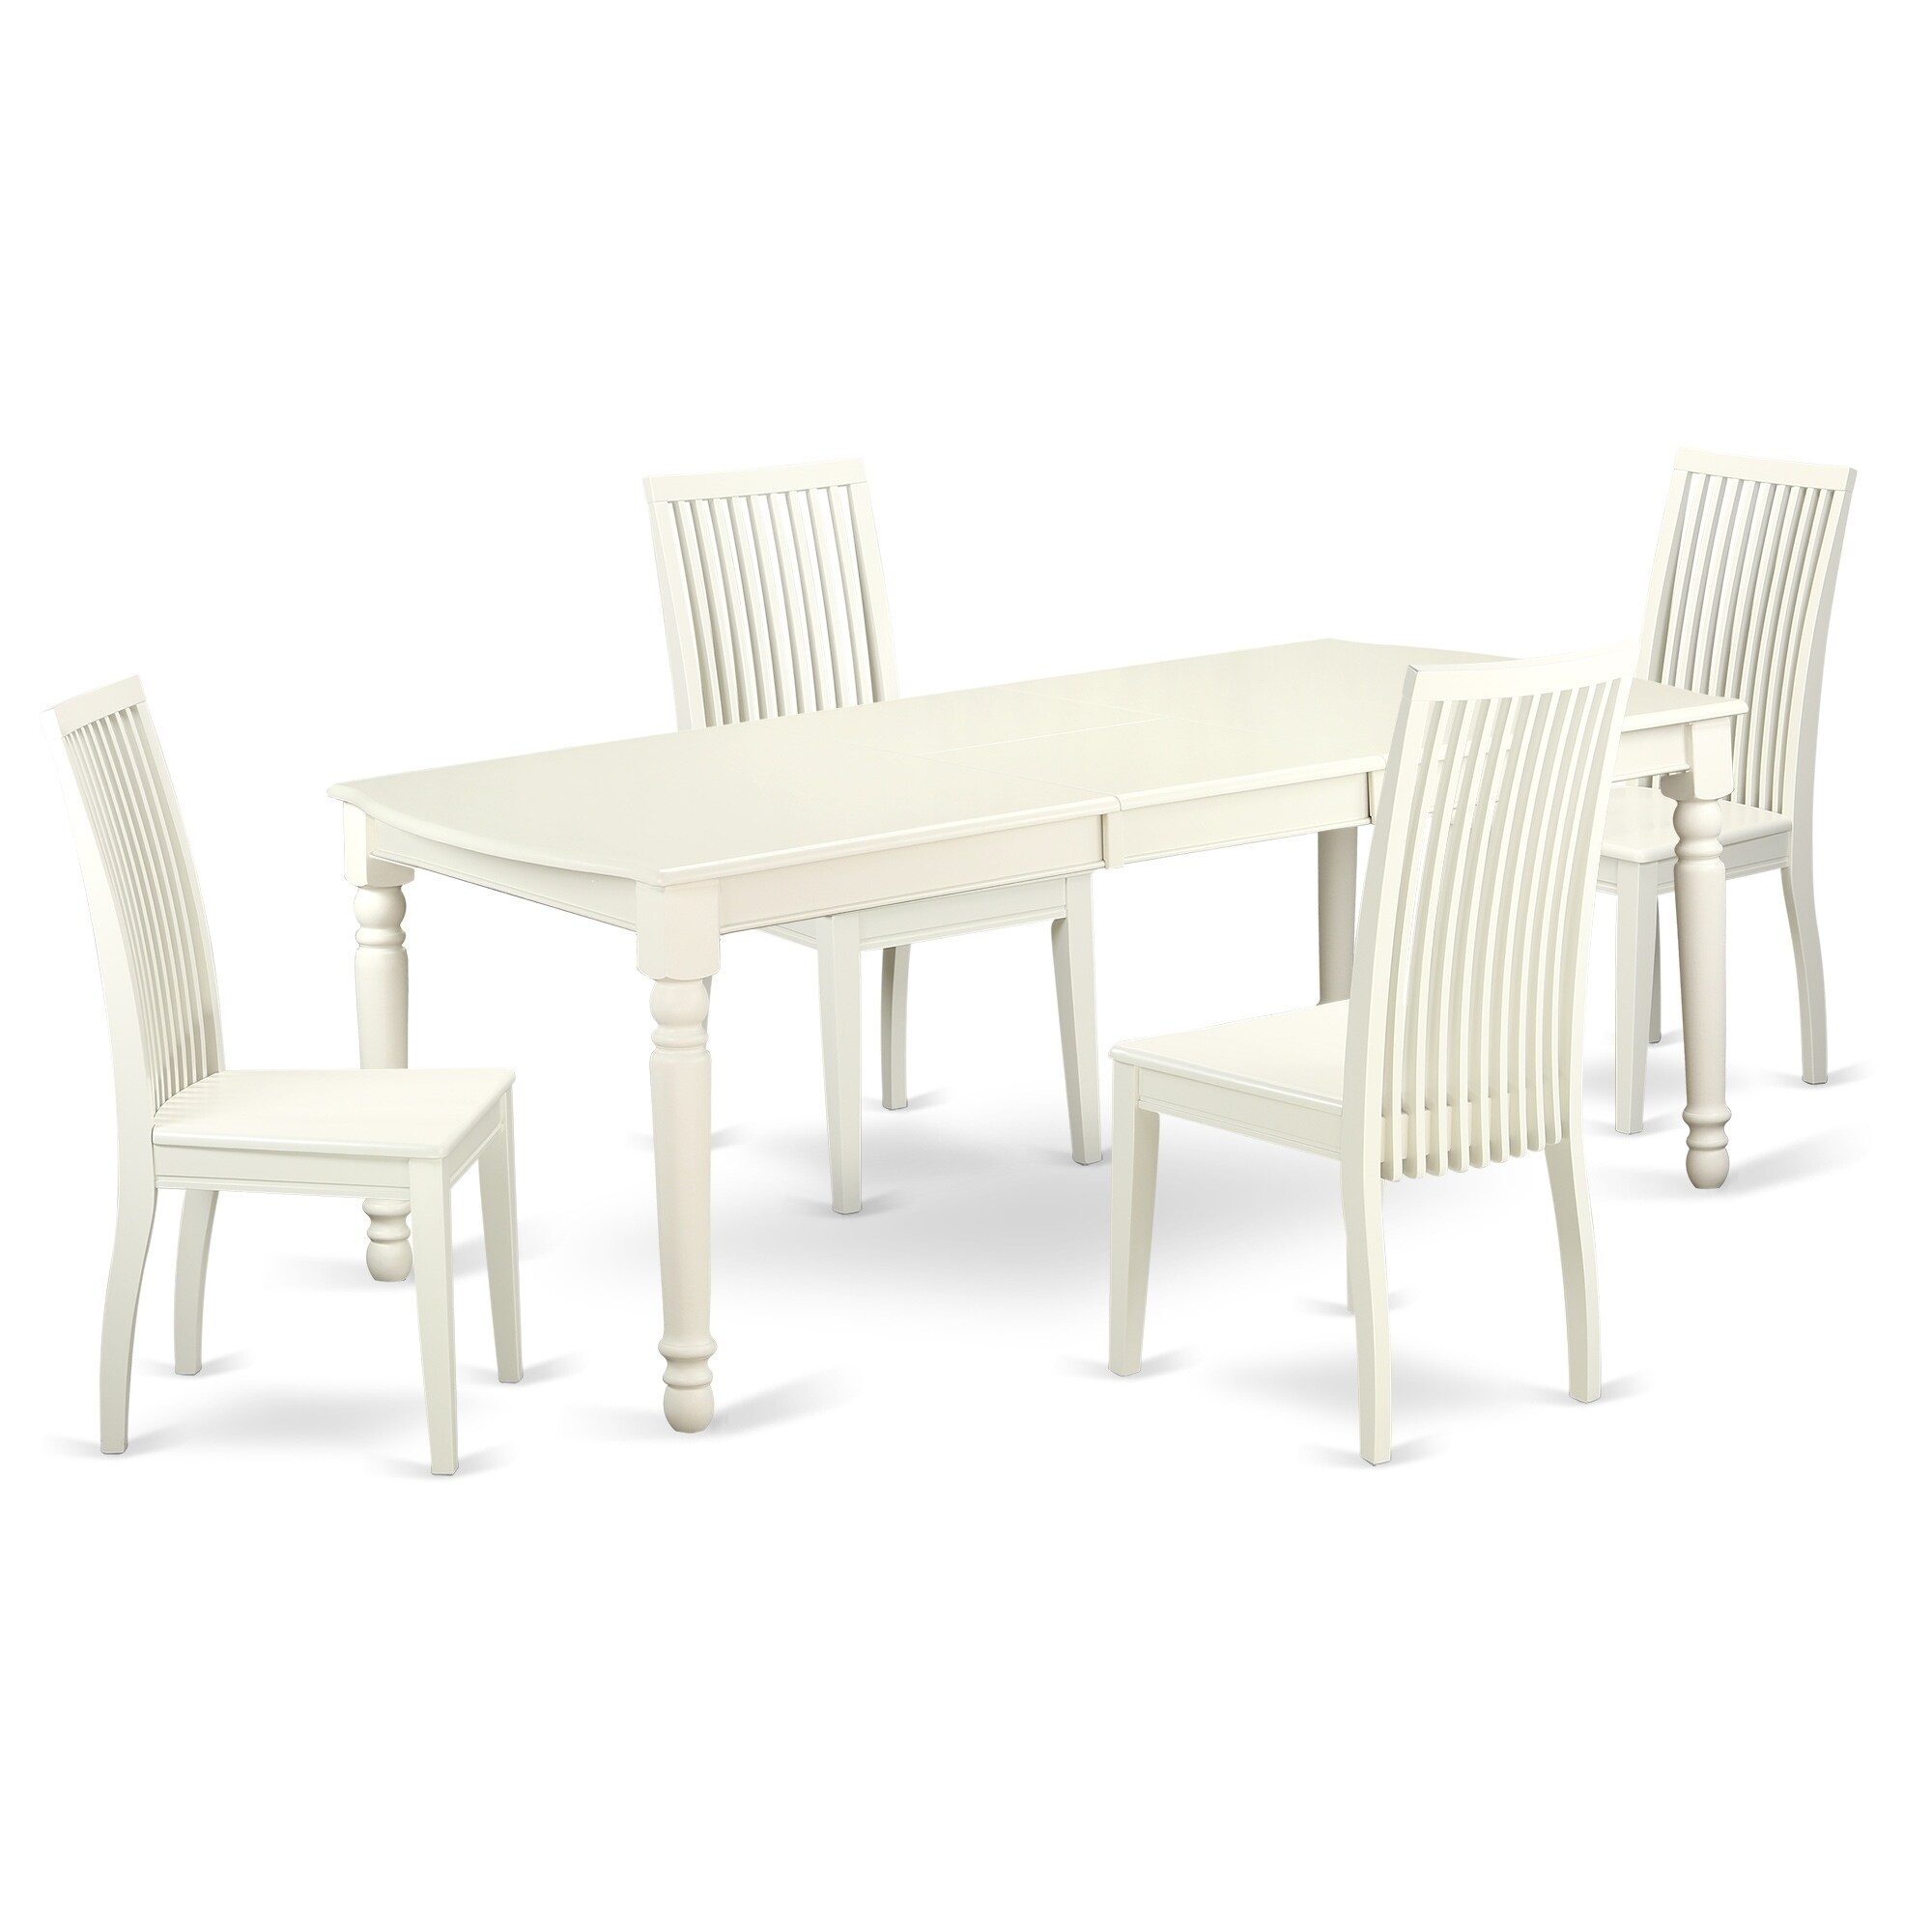 Shop DOIP5 LWH W 5 PC Kitchen Tables And Chair Set With One Dover